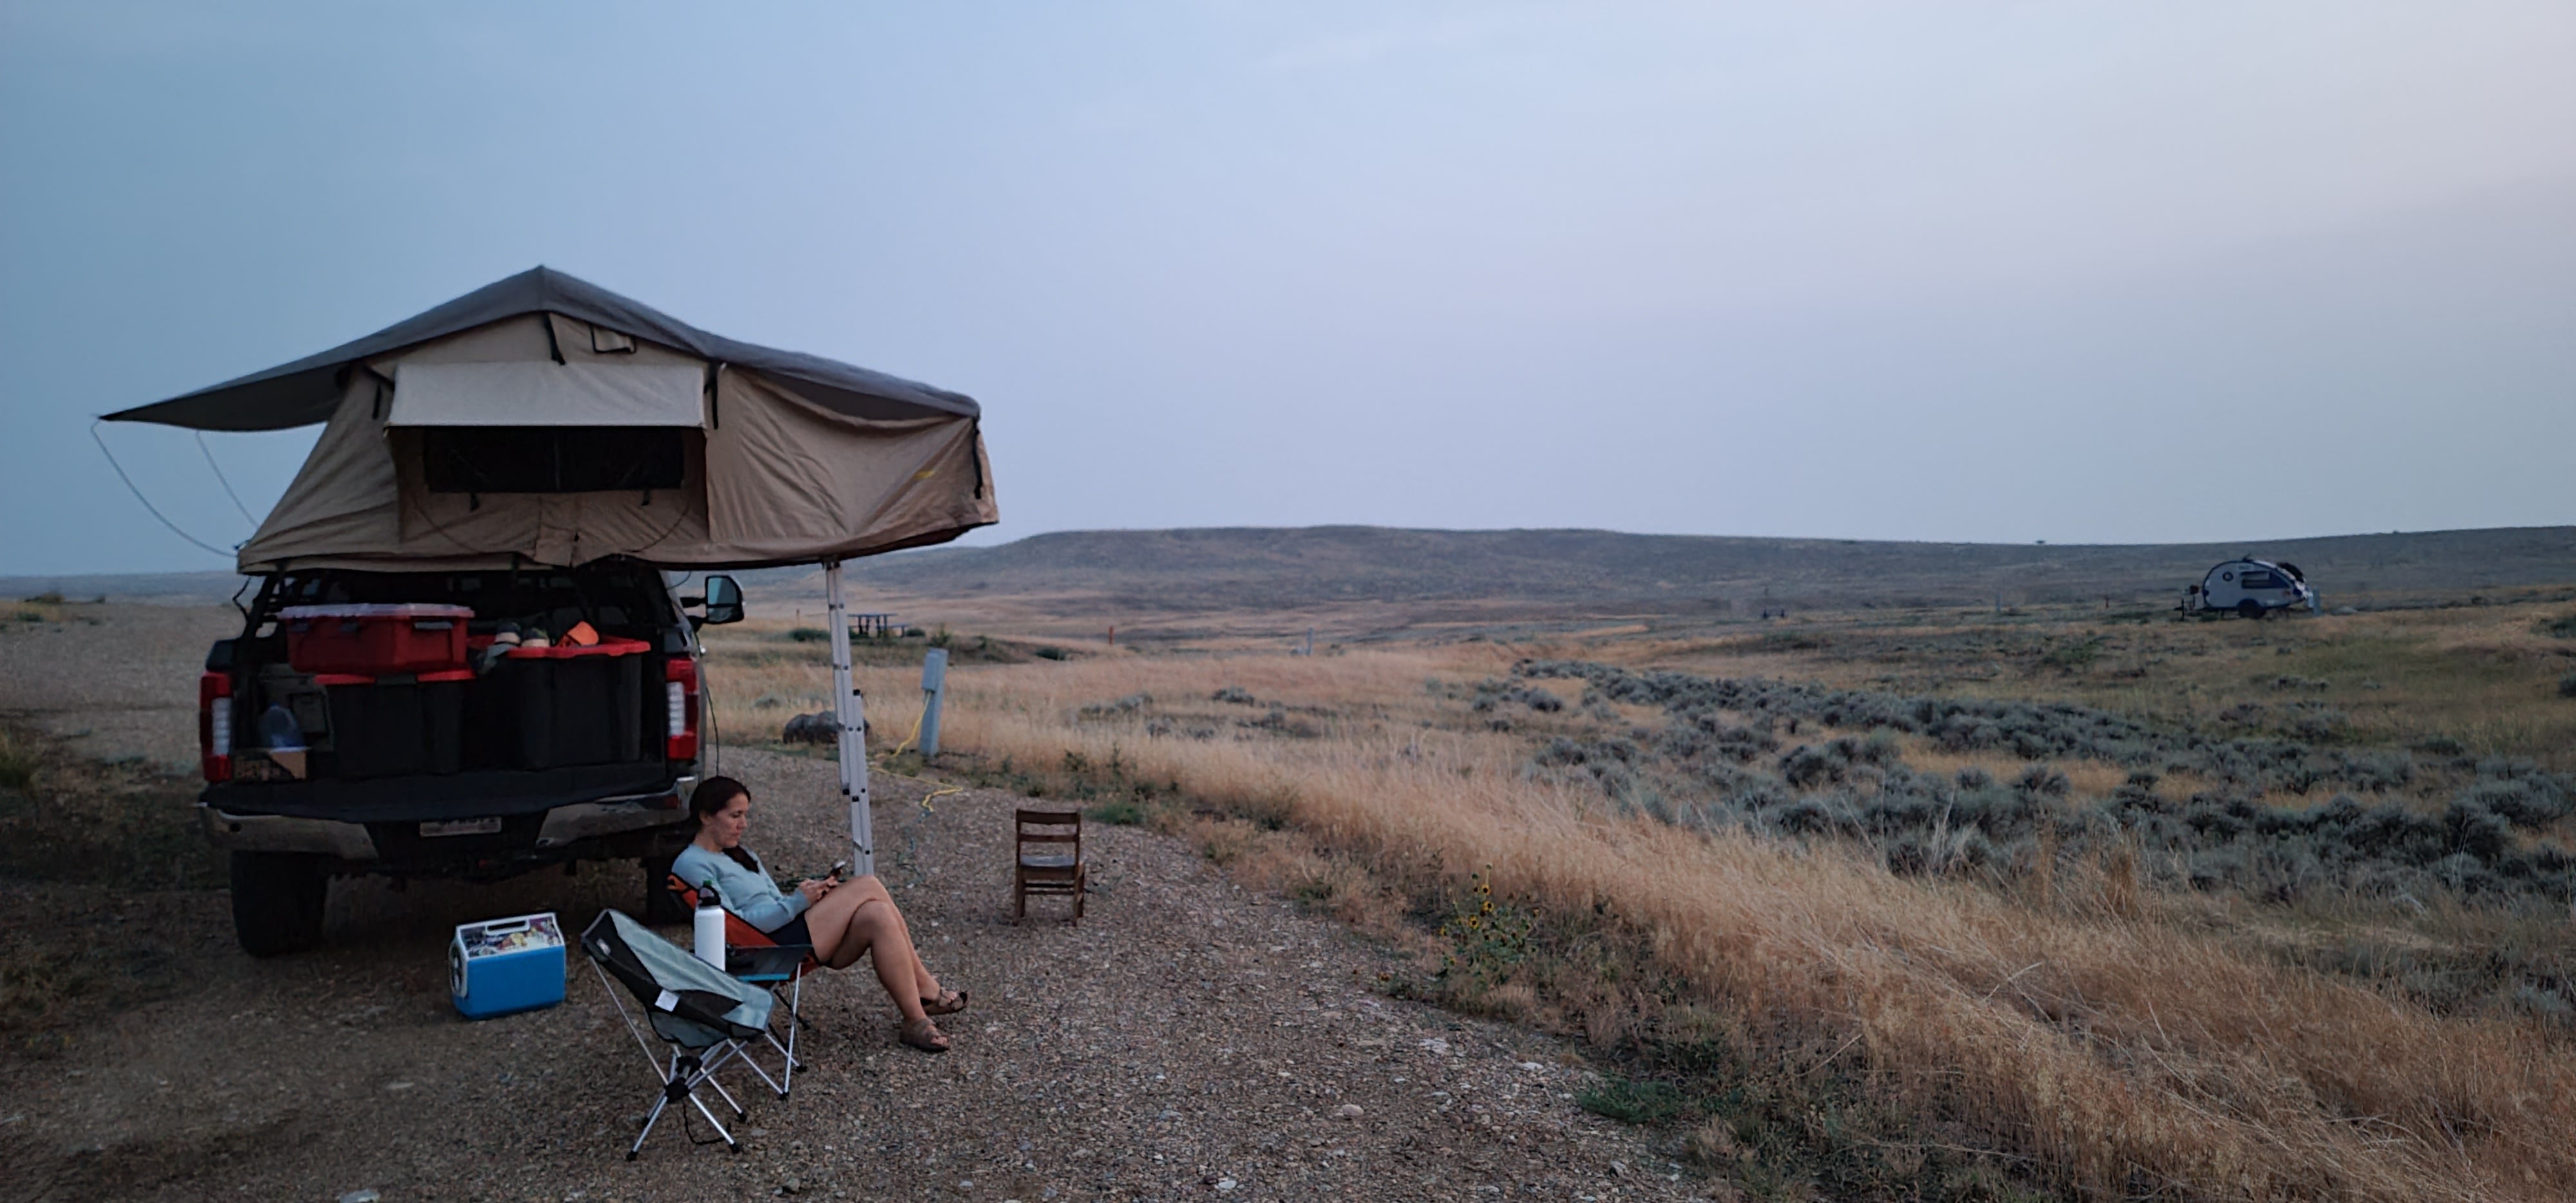 Camper submitted image from Antelope Creek - 1